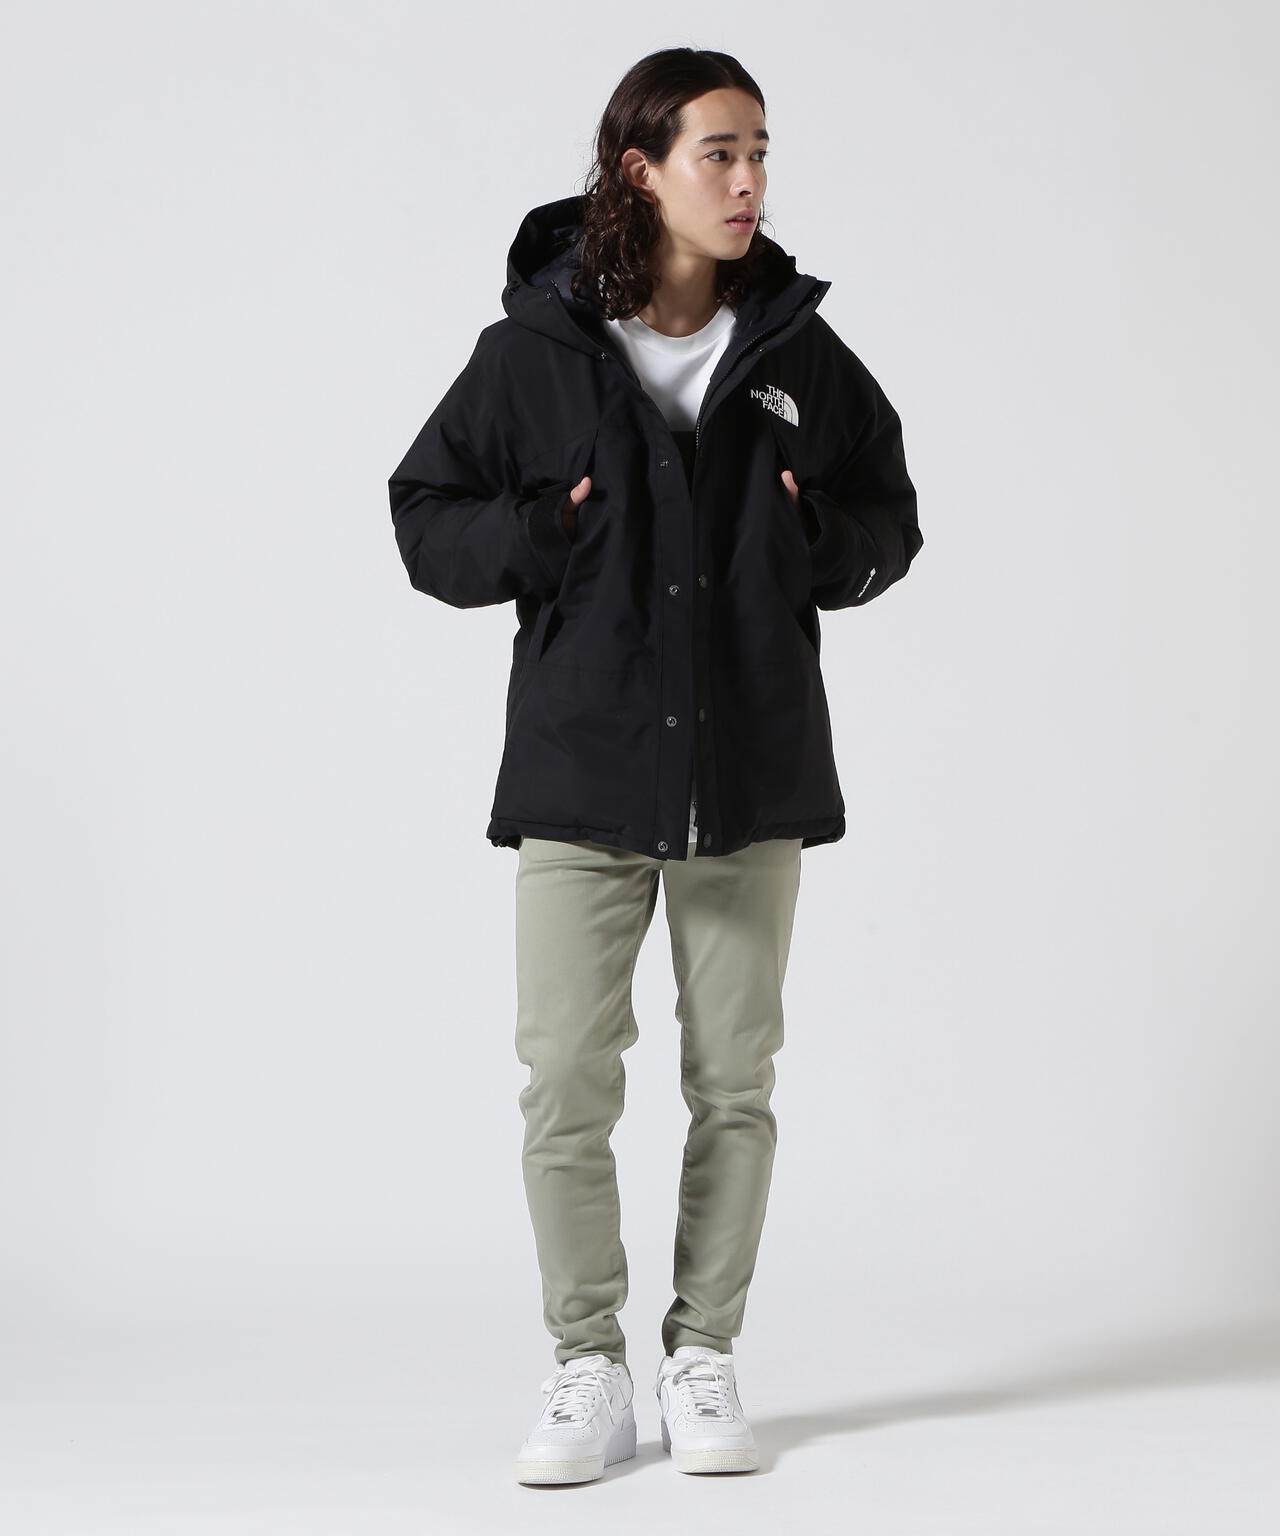 THE NORTH FACE (ザ・ノースフェイス）Mountain Down Jacket | B'2nd 